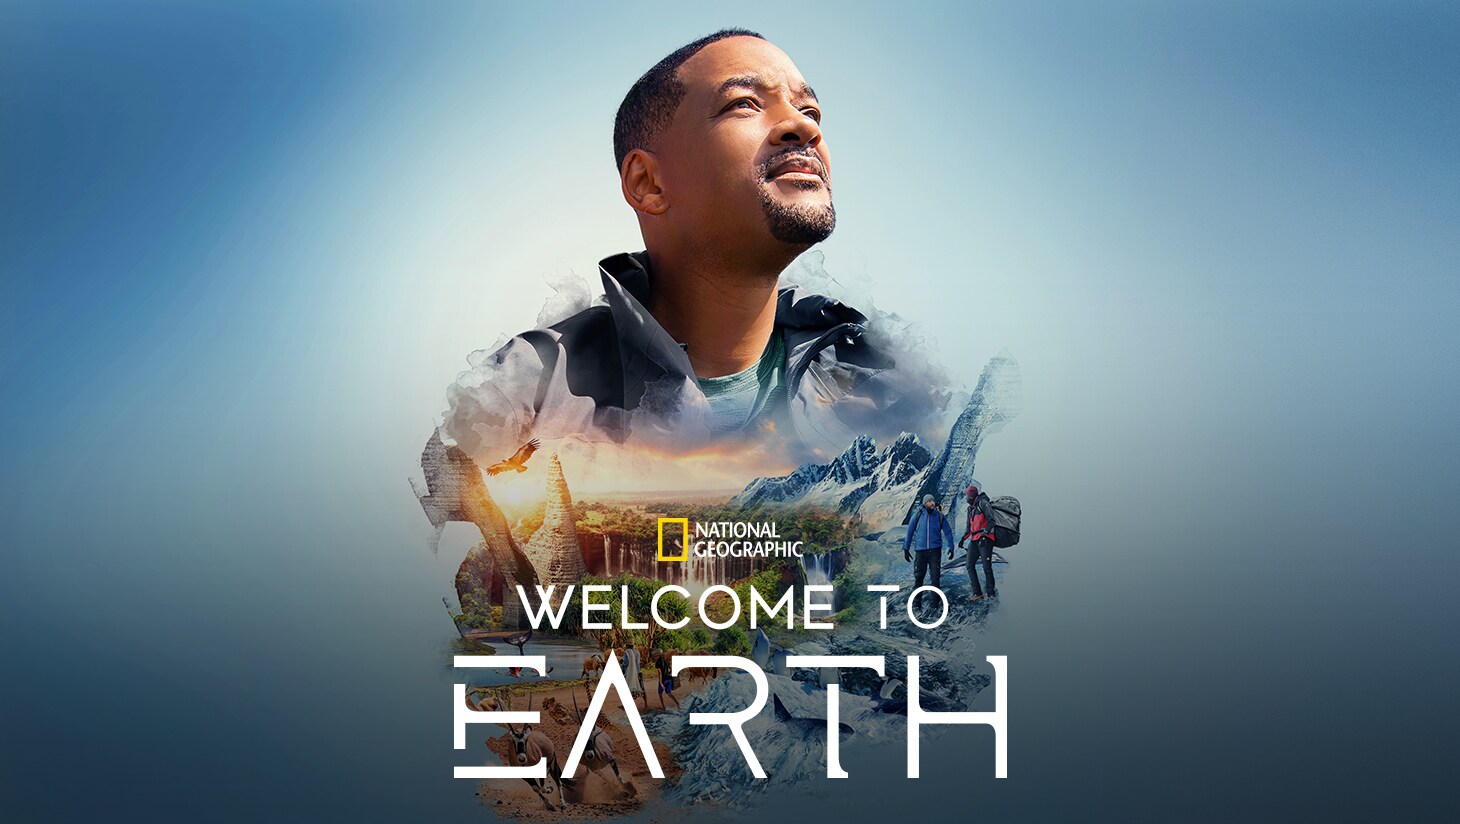 Welcome to Earth keyart featuring Will Smith.